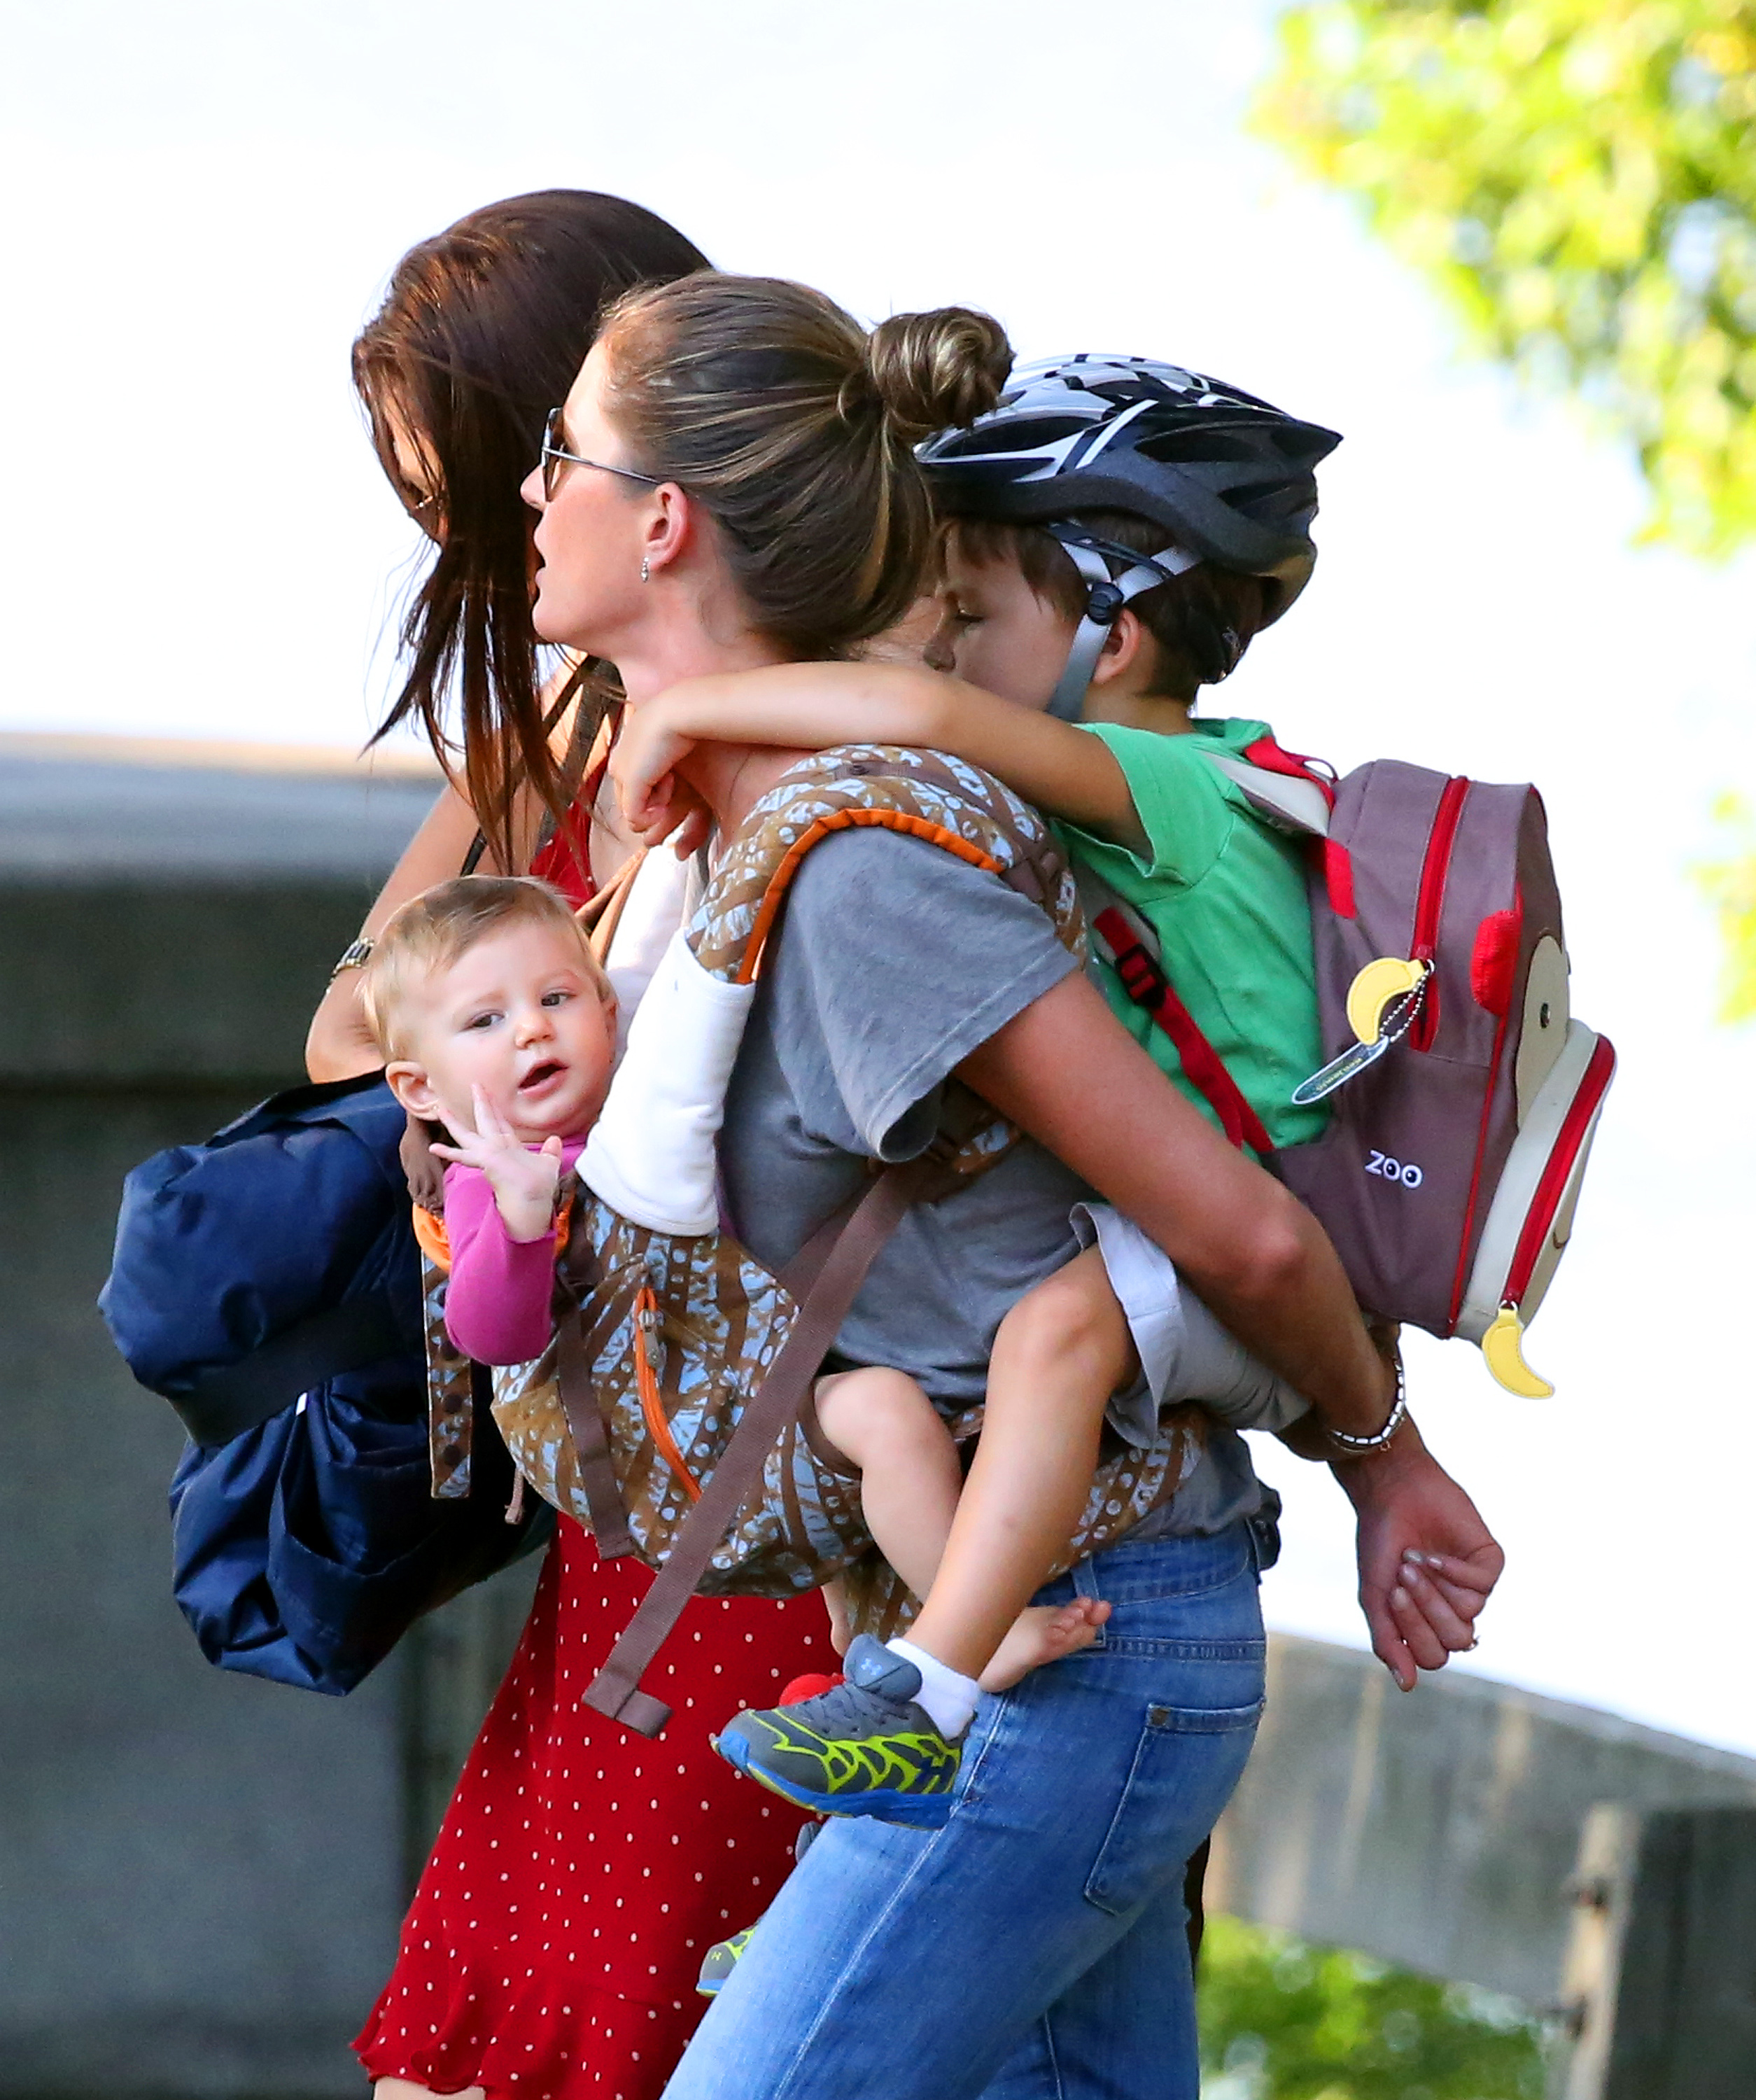 Gisele Bündchen, Benjamin, and Vivian in Boston, Massachusetts on August 30, 2013 | Source: Getty Images